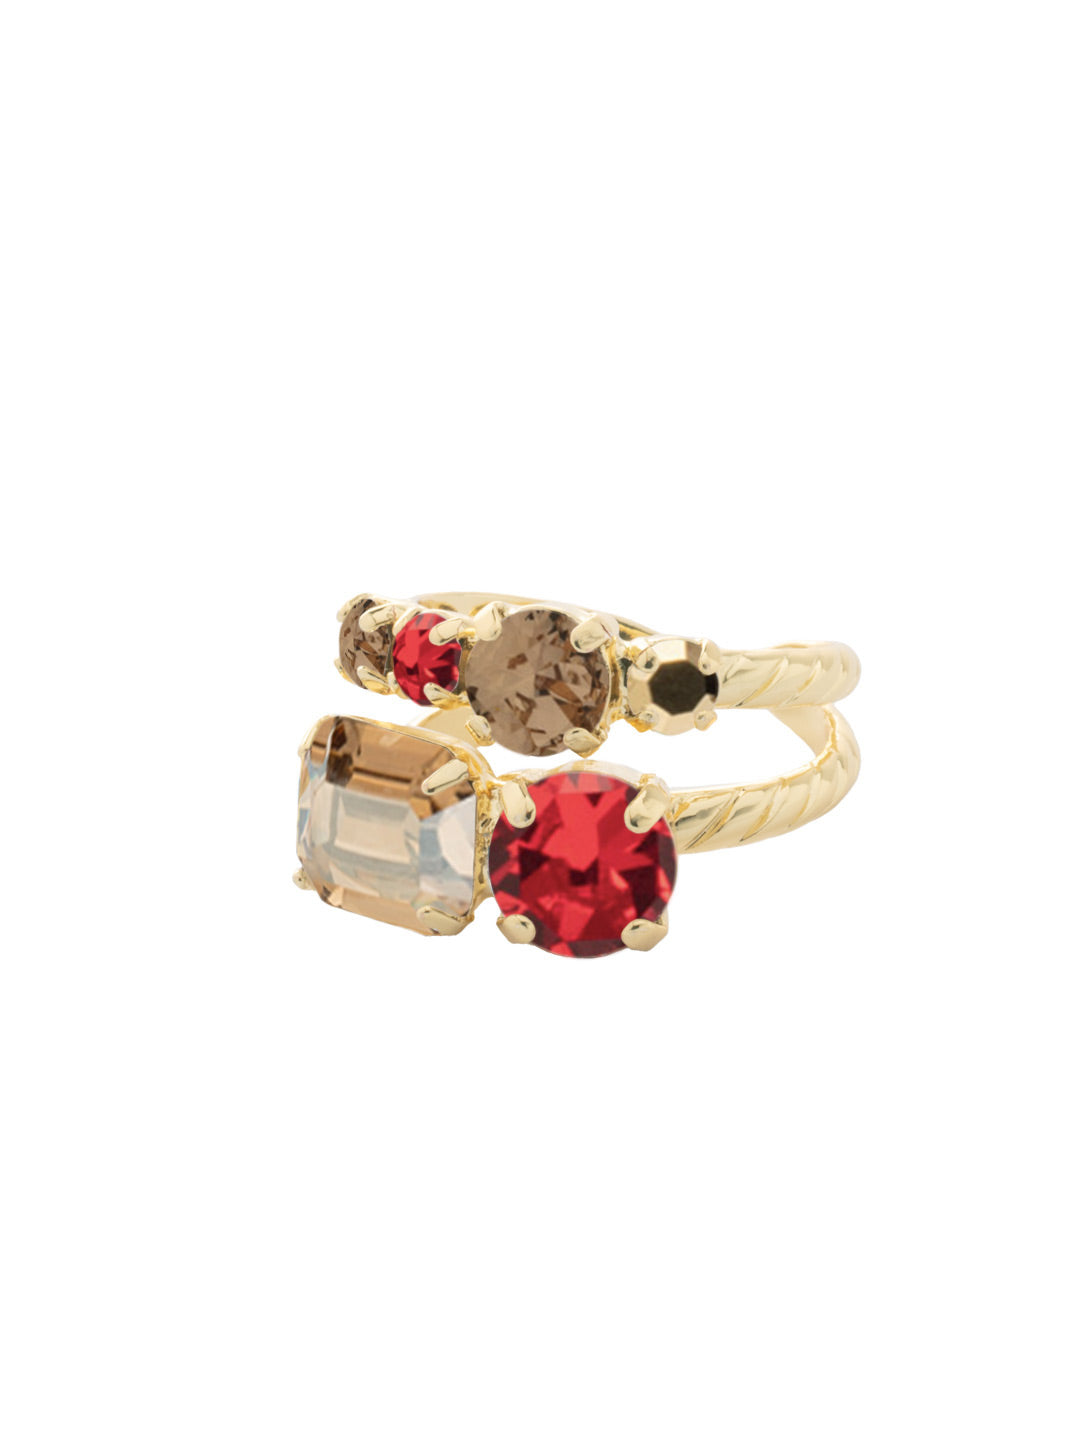 Miriam Stacked Ring - RFC44BGGGA - <p>The Miriam Stacked Ring features assorted cut crystals on an adjustable band. From Sorrelli's Go Garnet collection in our Bright Gold-tone finish.</p>